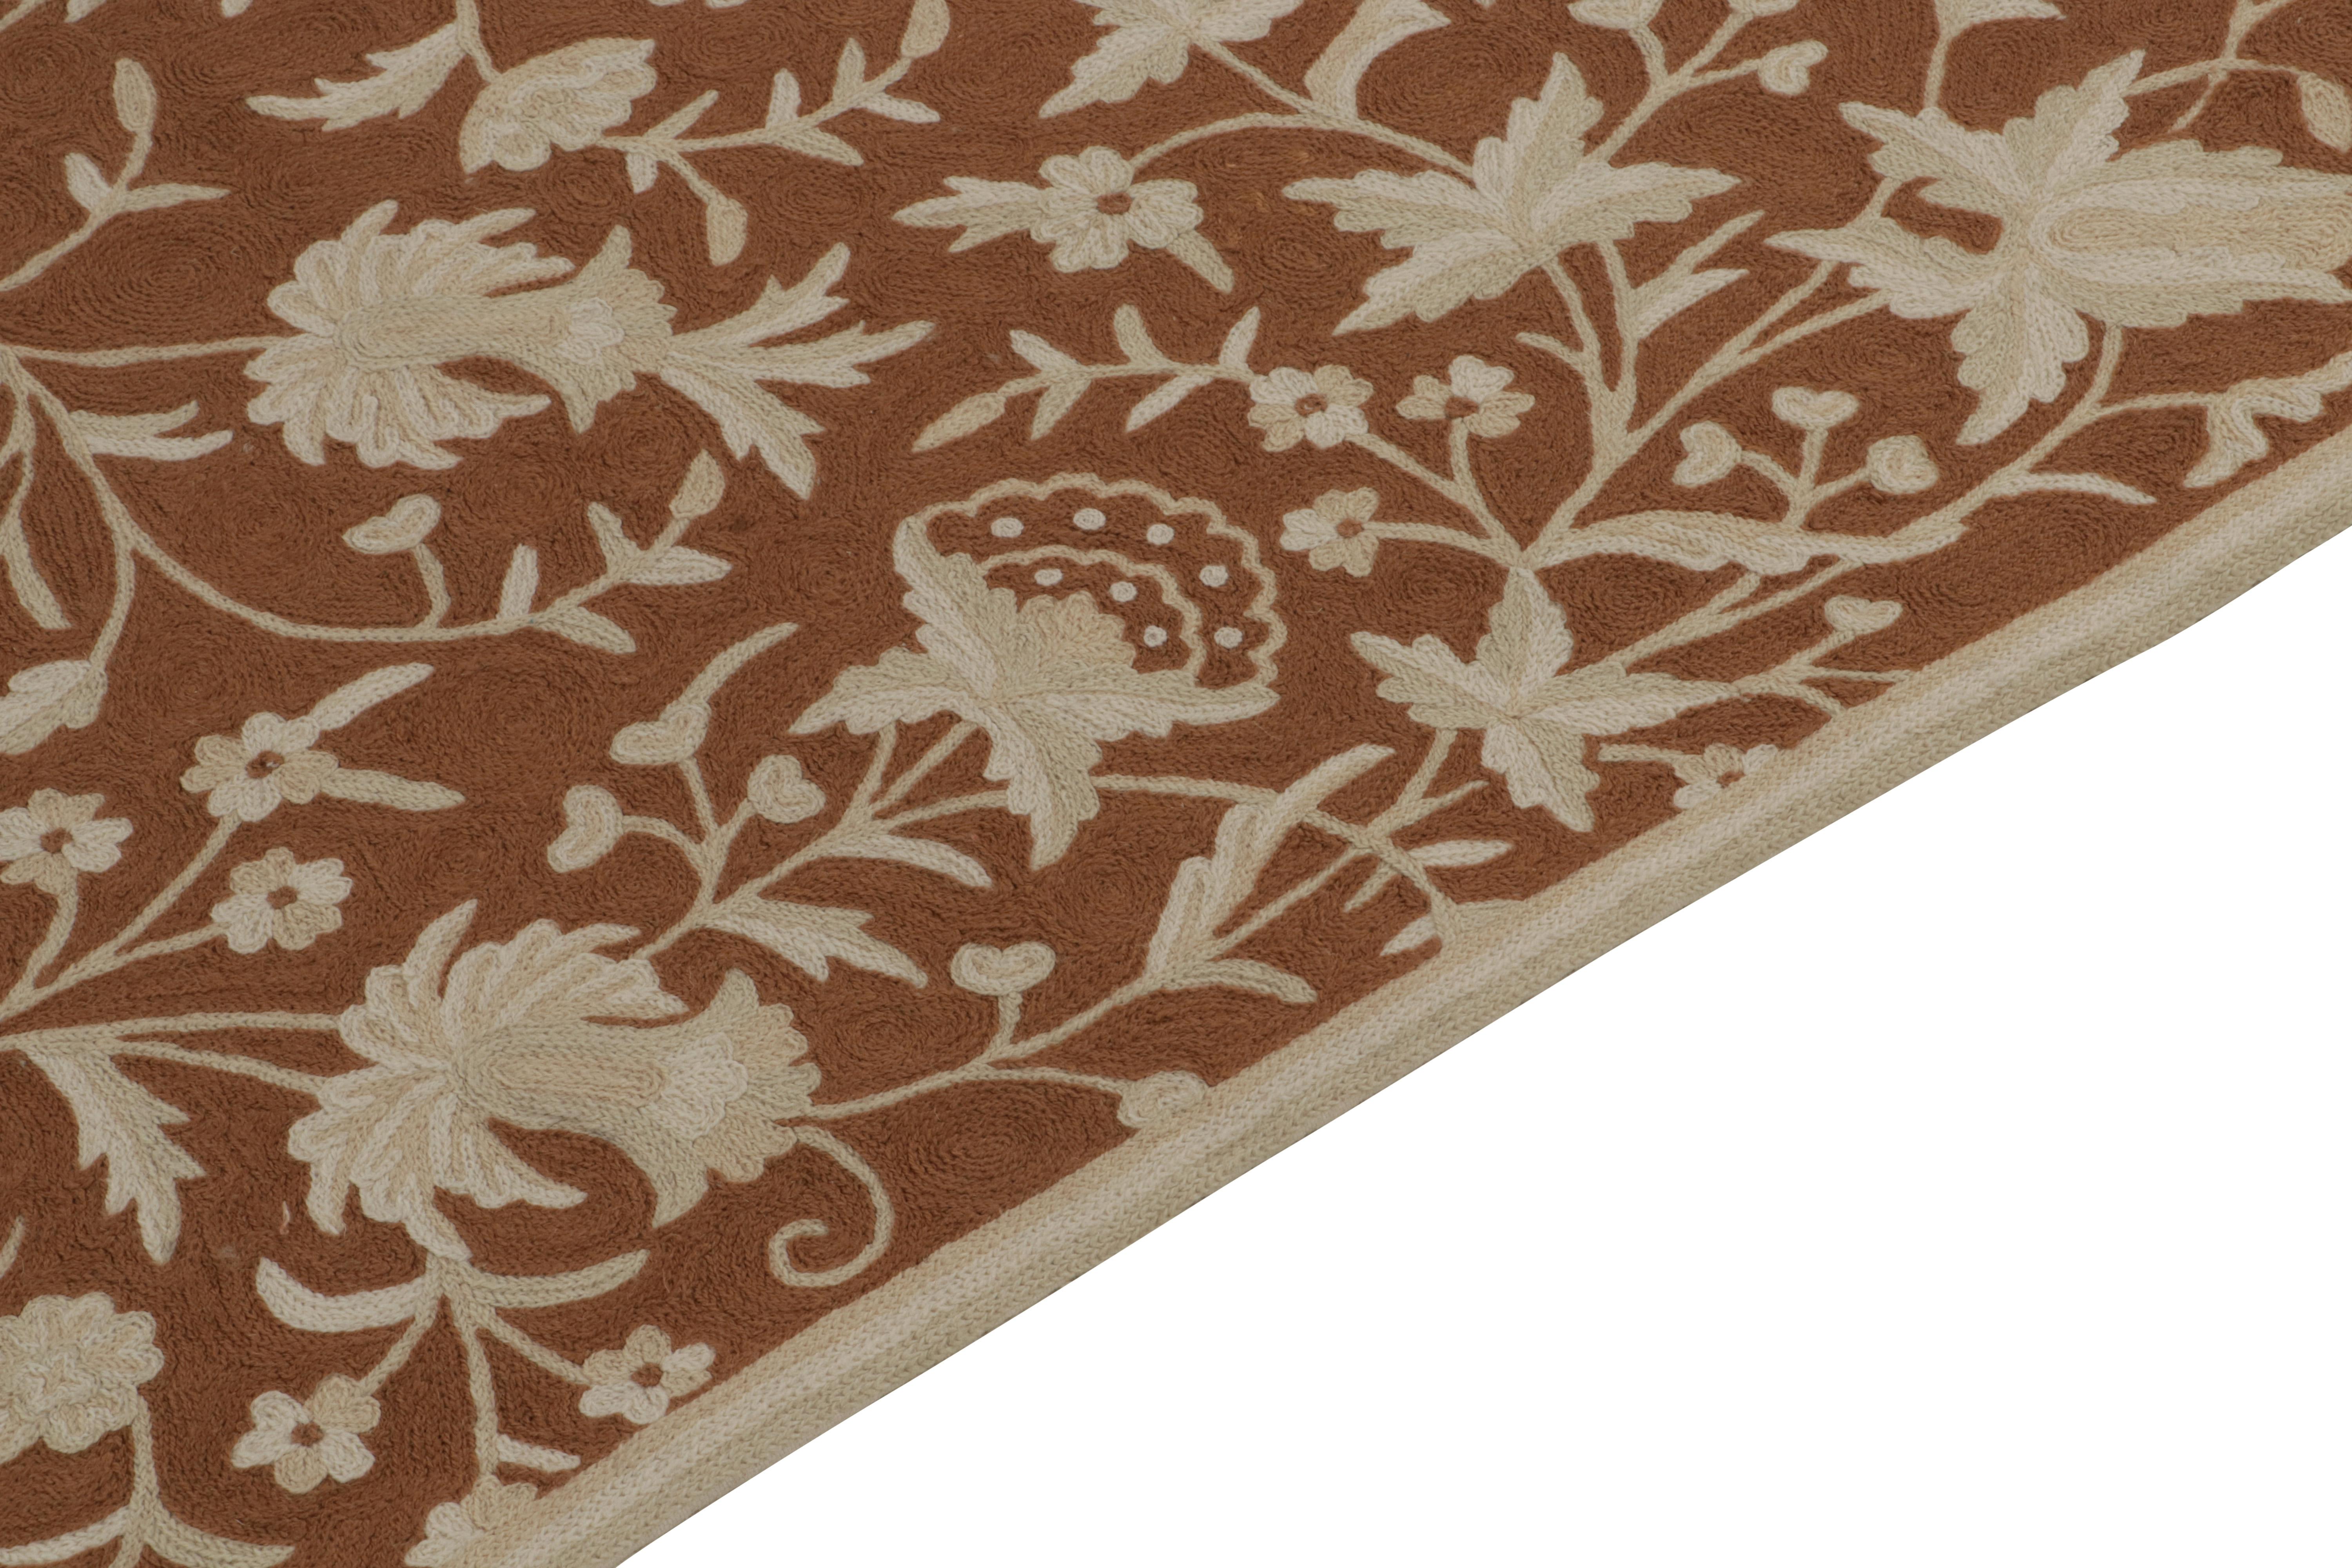 Hand-Knotted Rug & Kilim’s Contemporary Flat Weave in Brown with Beige Floral Patterns For Sale